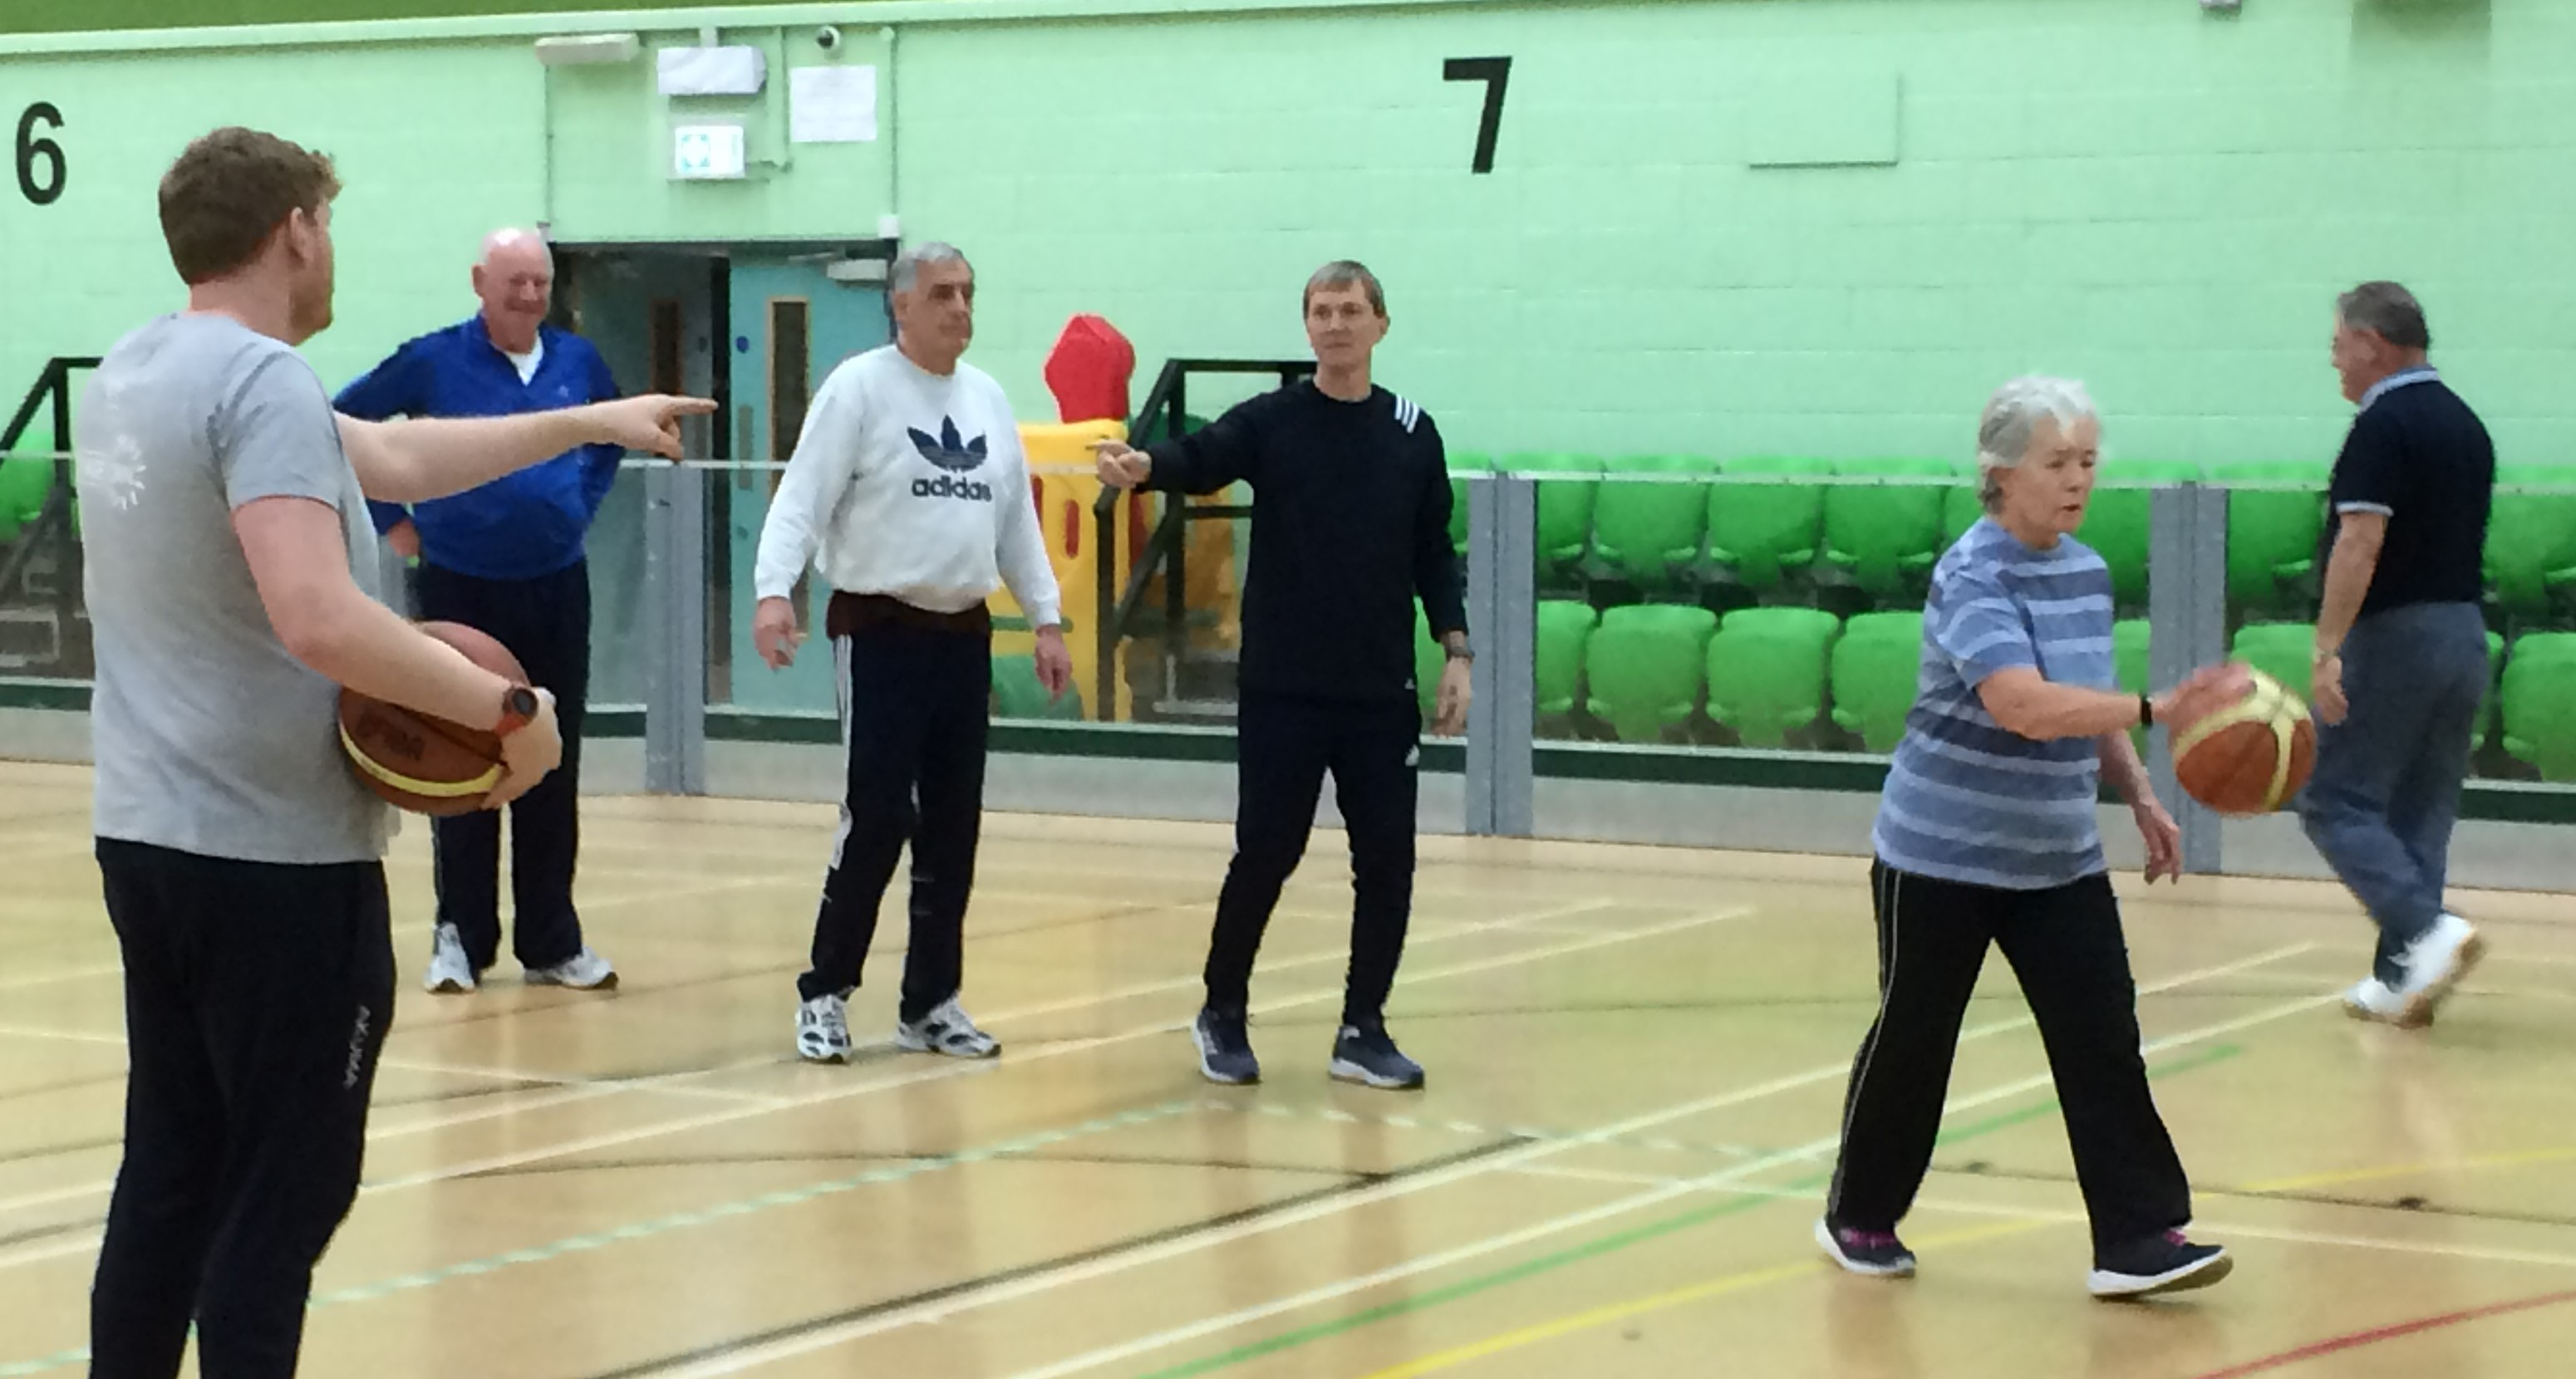 Image of participants of Walking Basketball from Age UK Herefordshire & Worcestershire